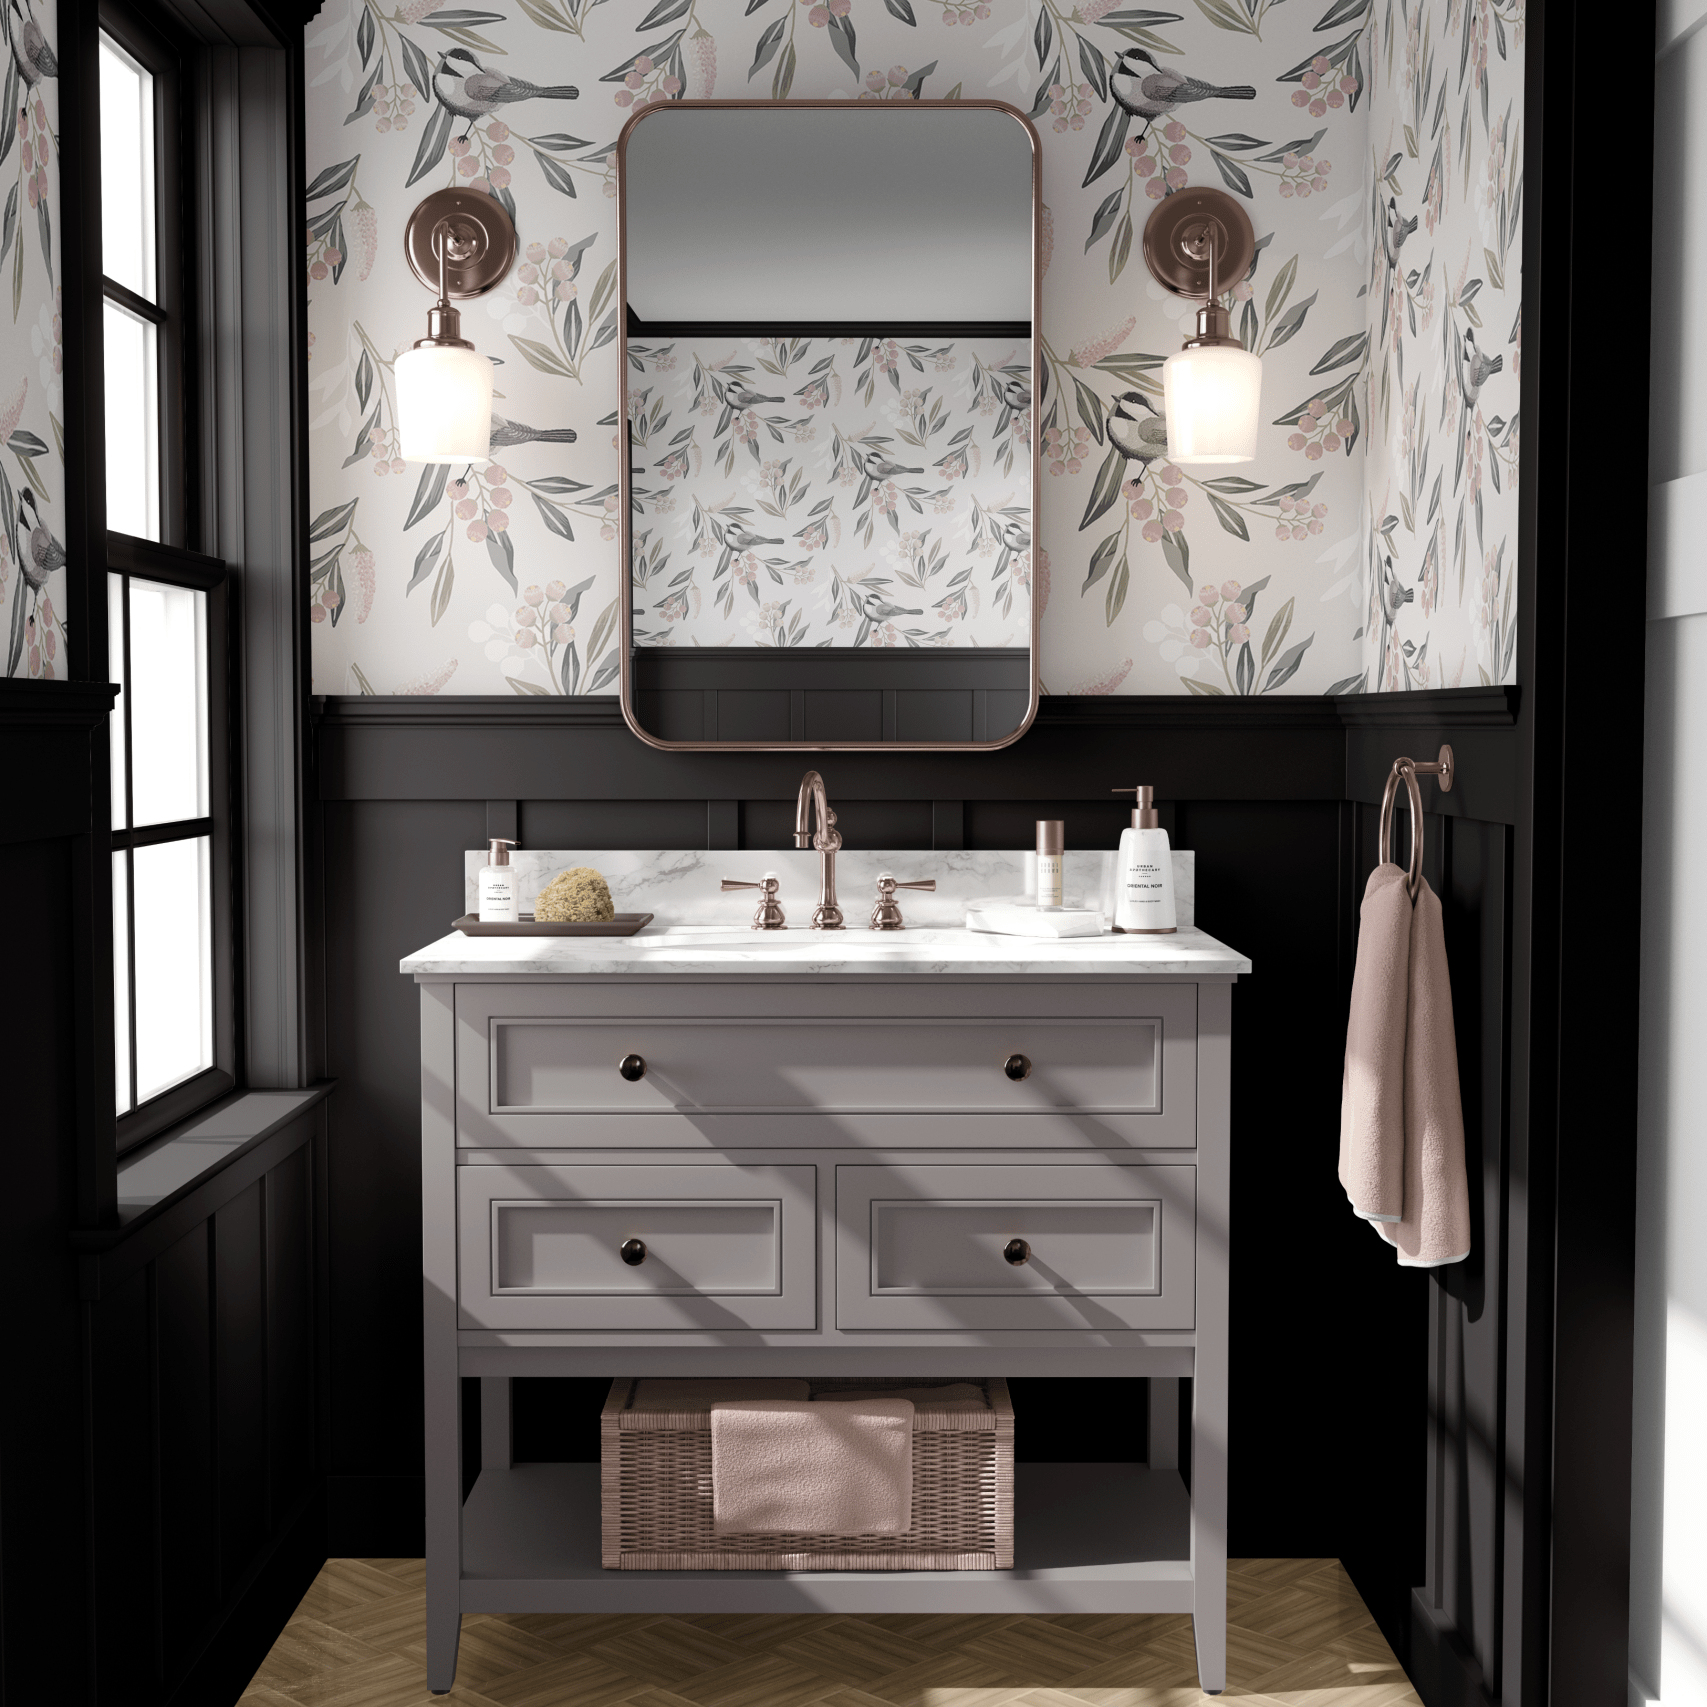 The Most Aesthetic Bathrooms for Every Design Style